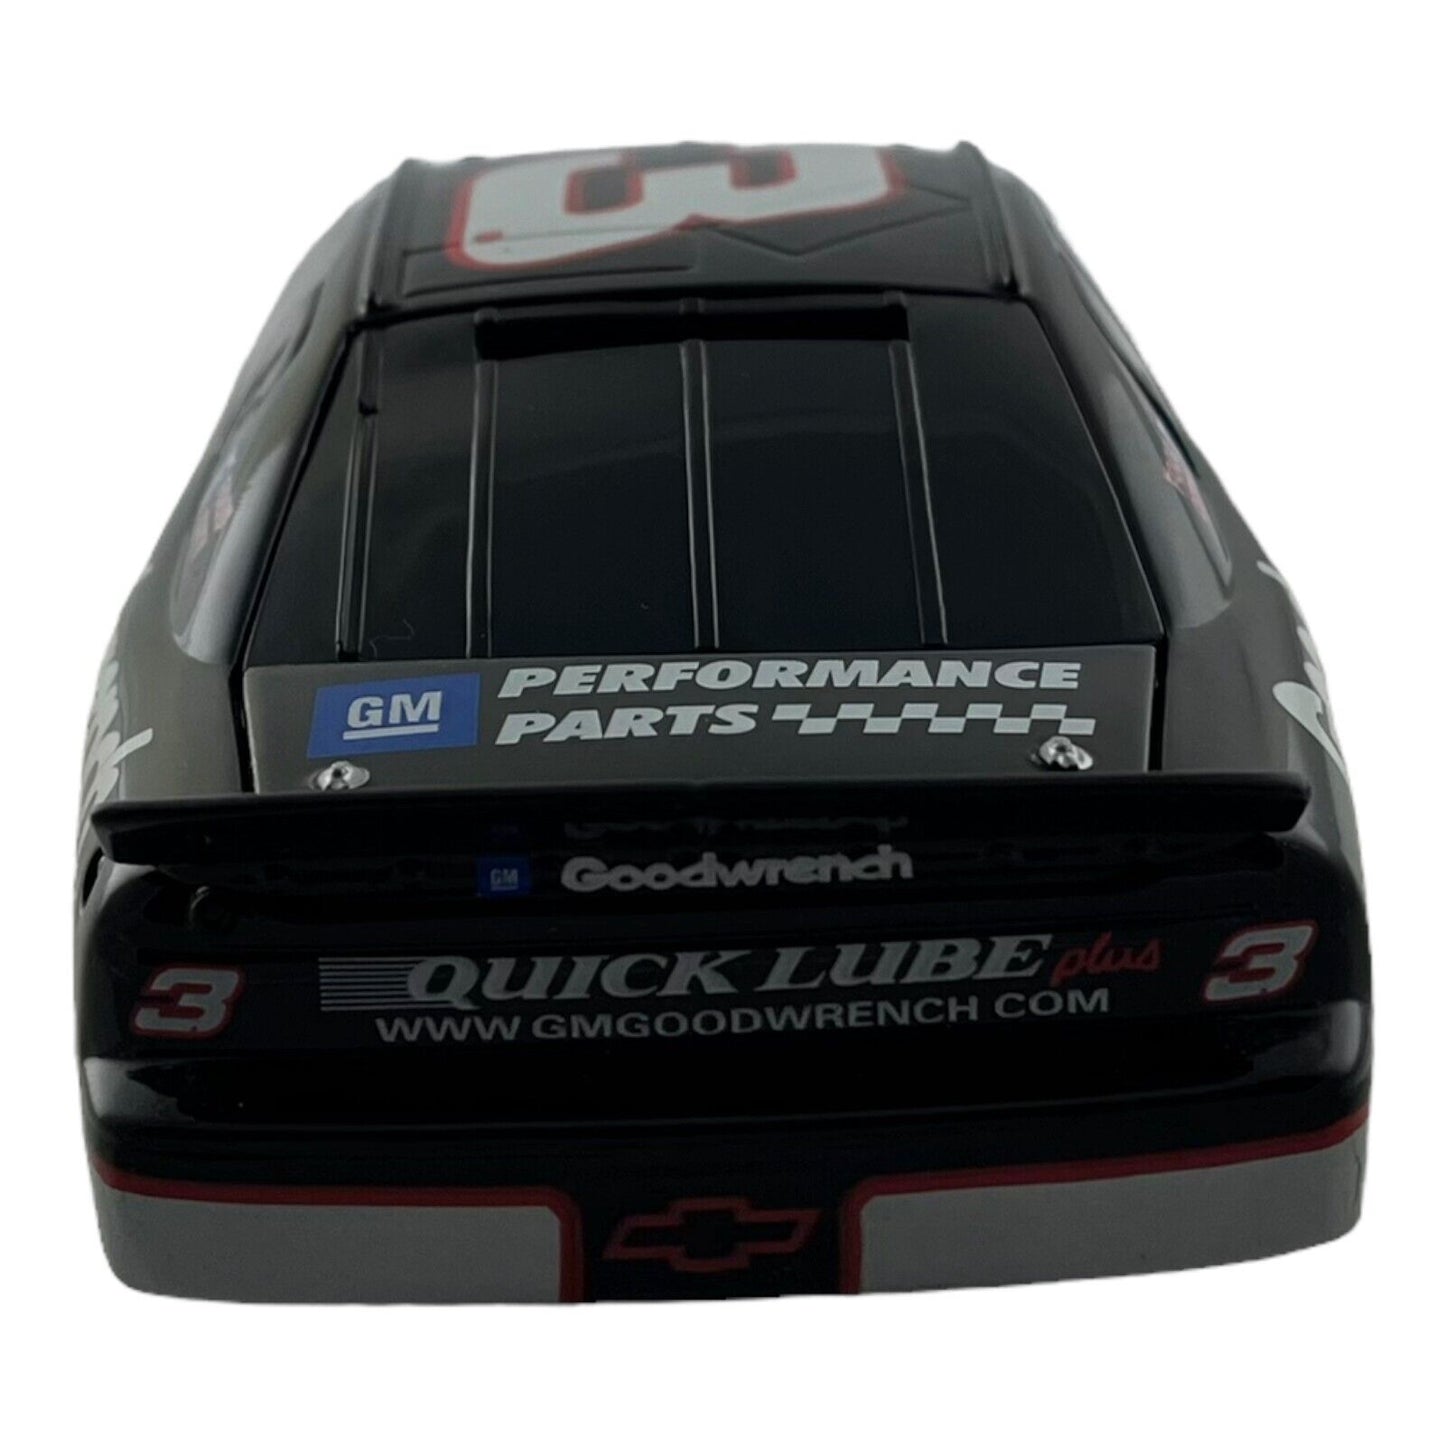 1:24 Scale Dale Earnhardt Sr. #3 Goodwrench Plus Bank 1998 Action